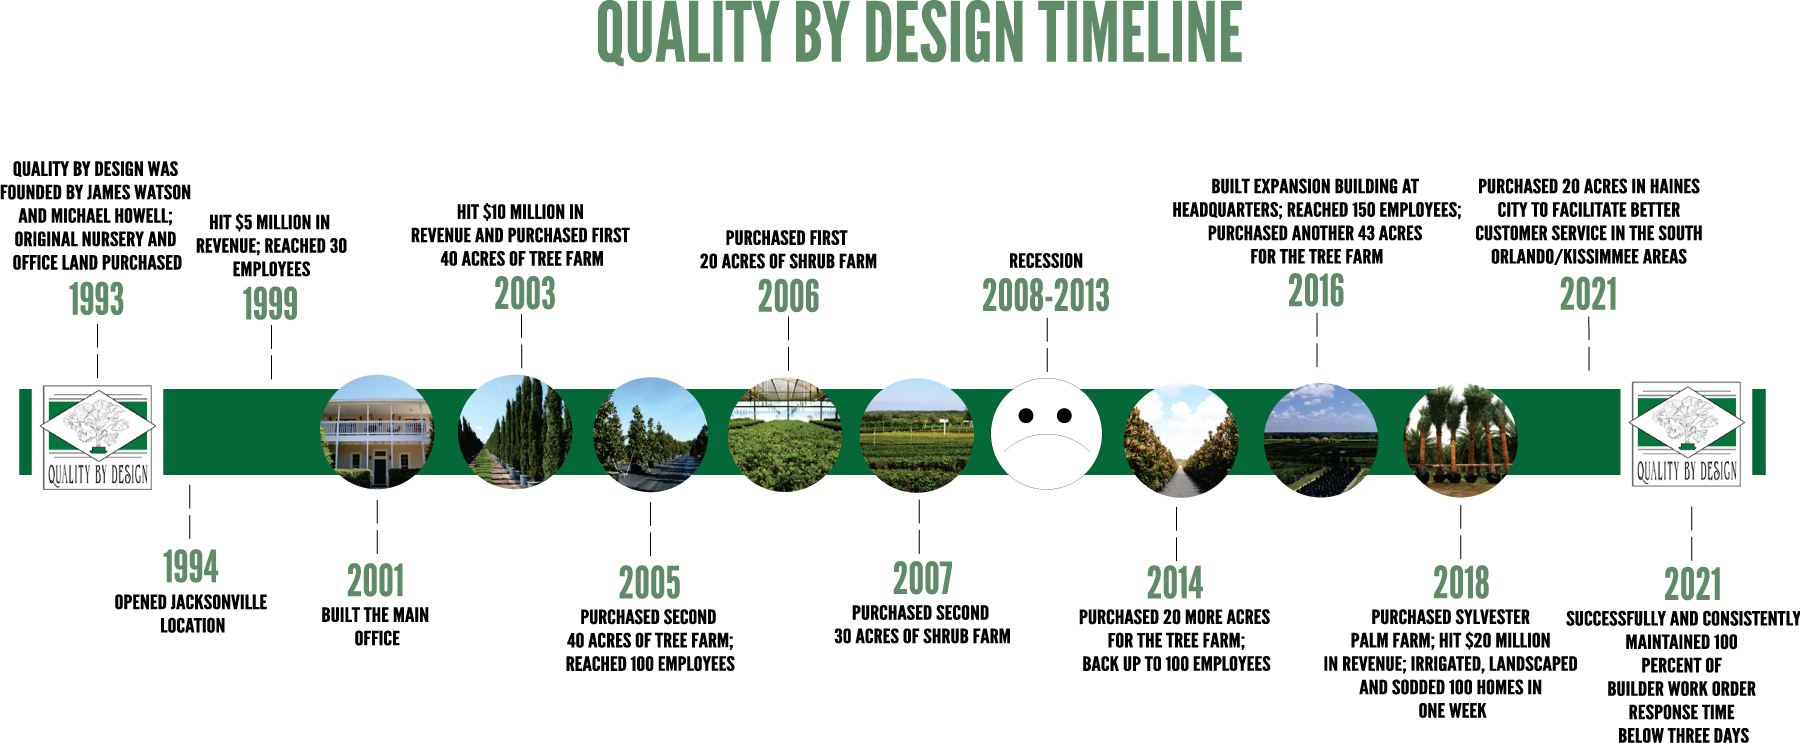 Timeline of Quality by Design